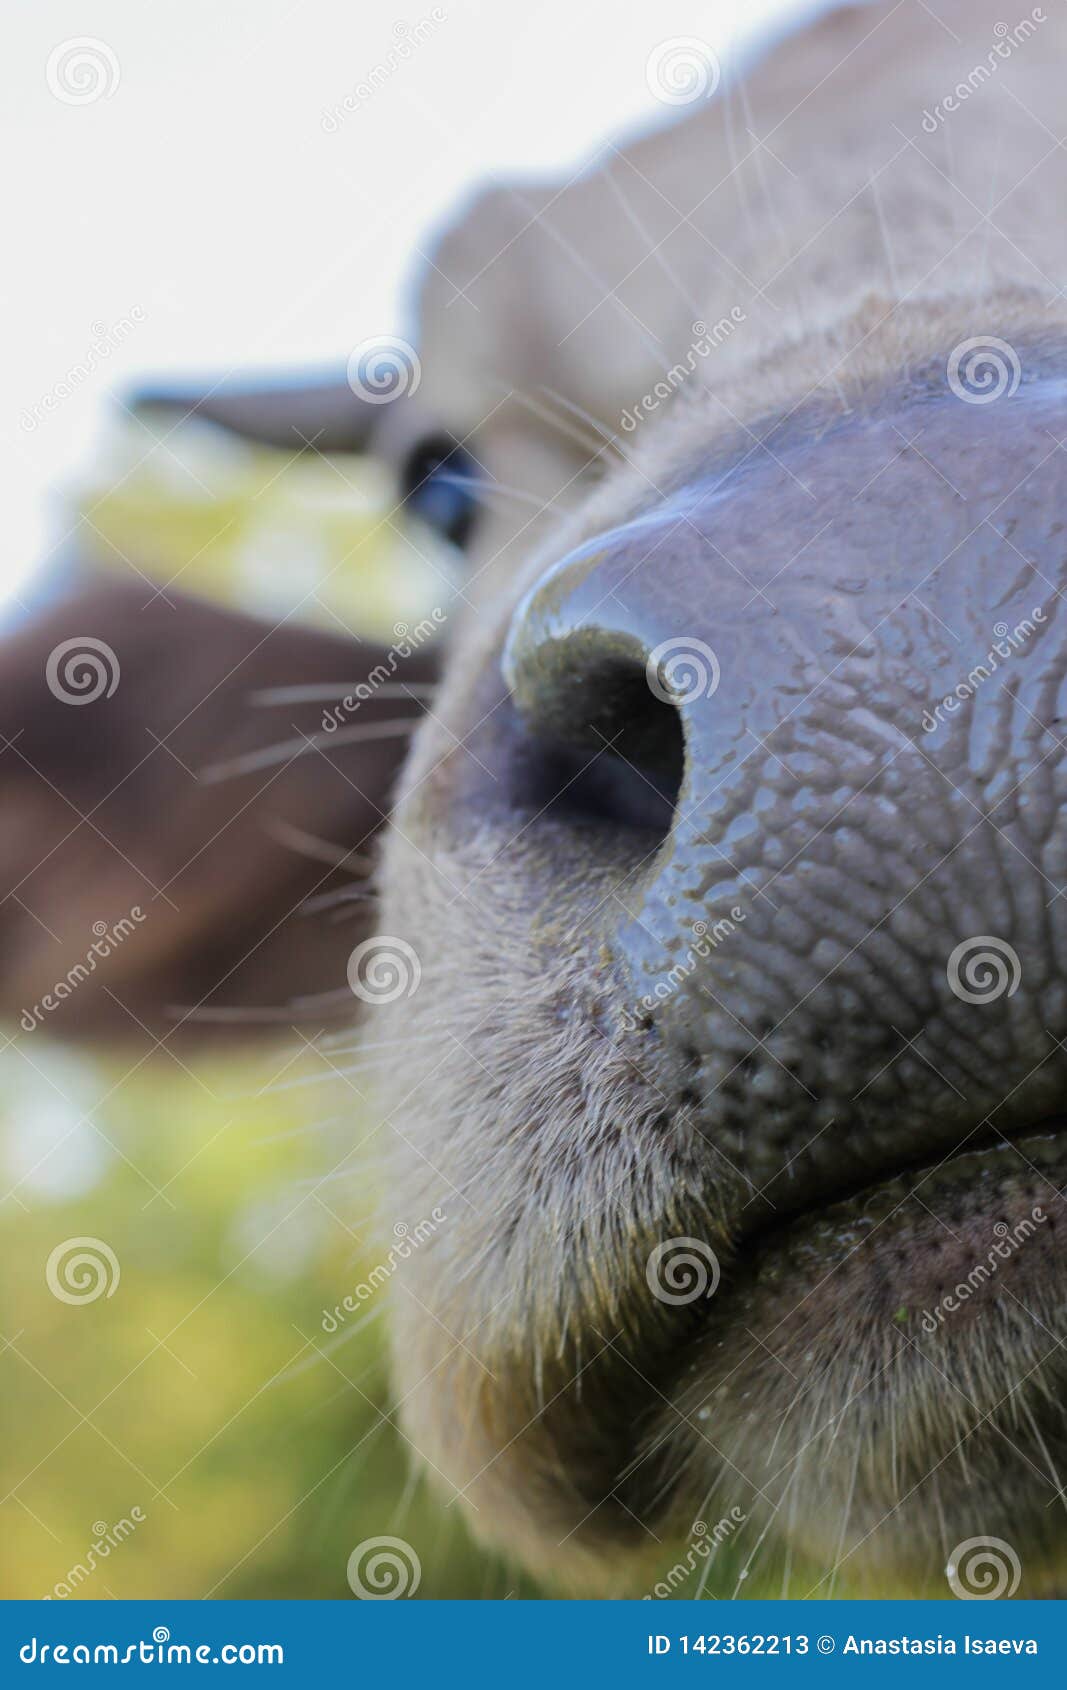 Funny cow nose close up stock image. Image of bovine - 142362213